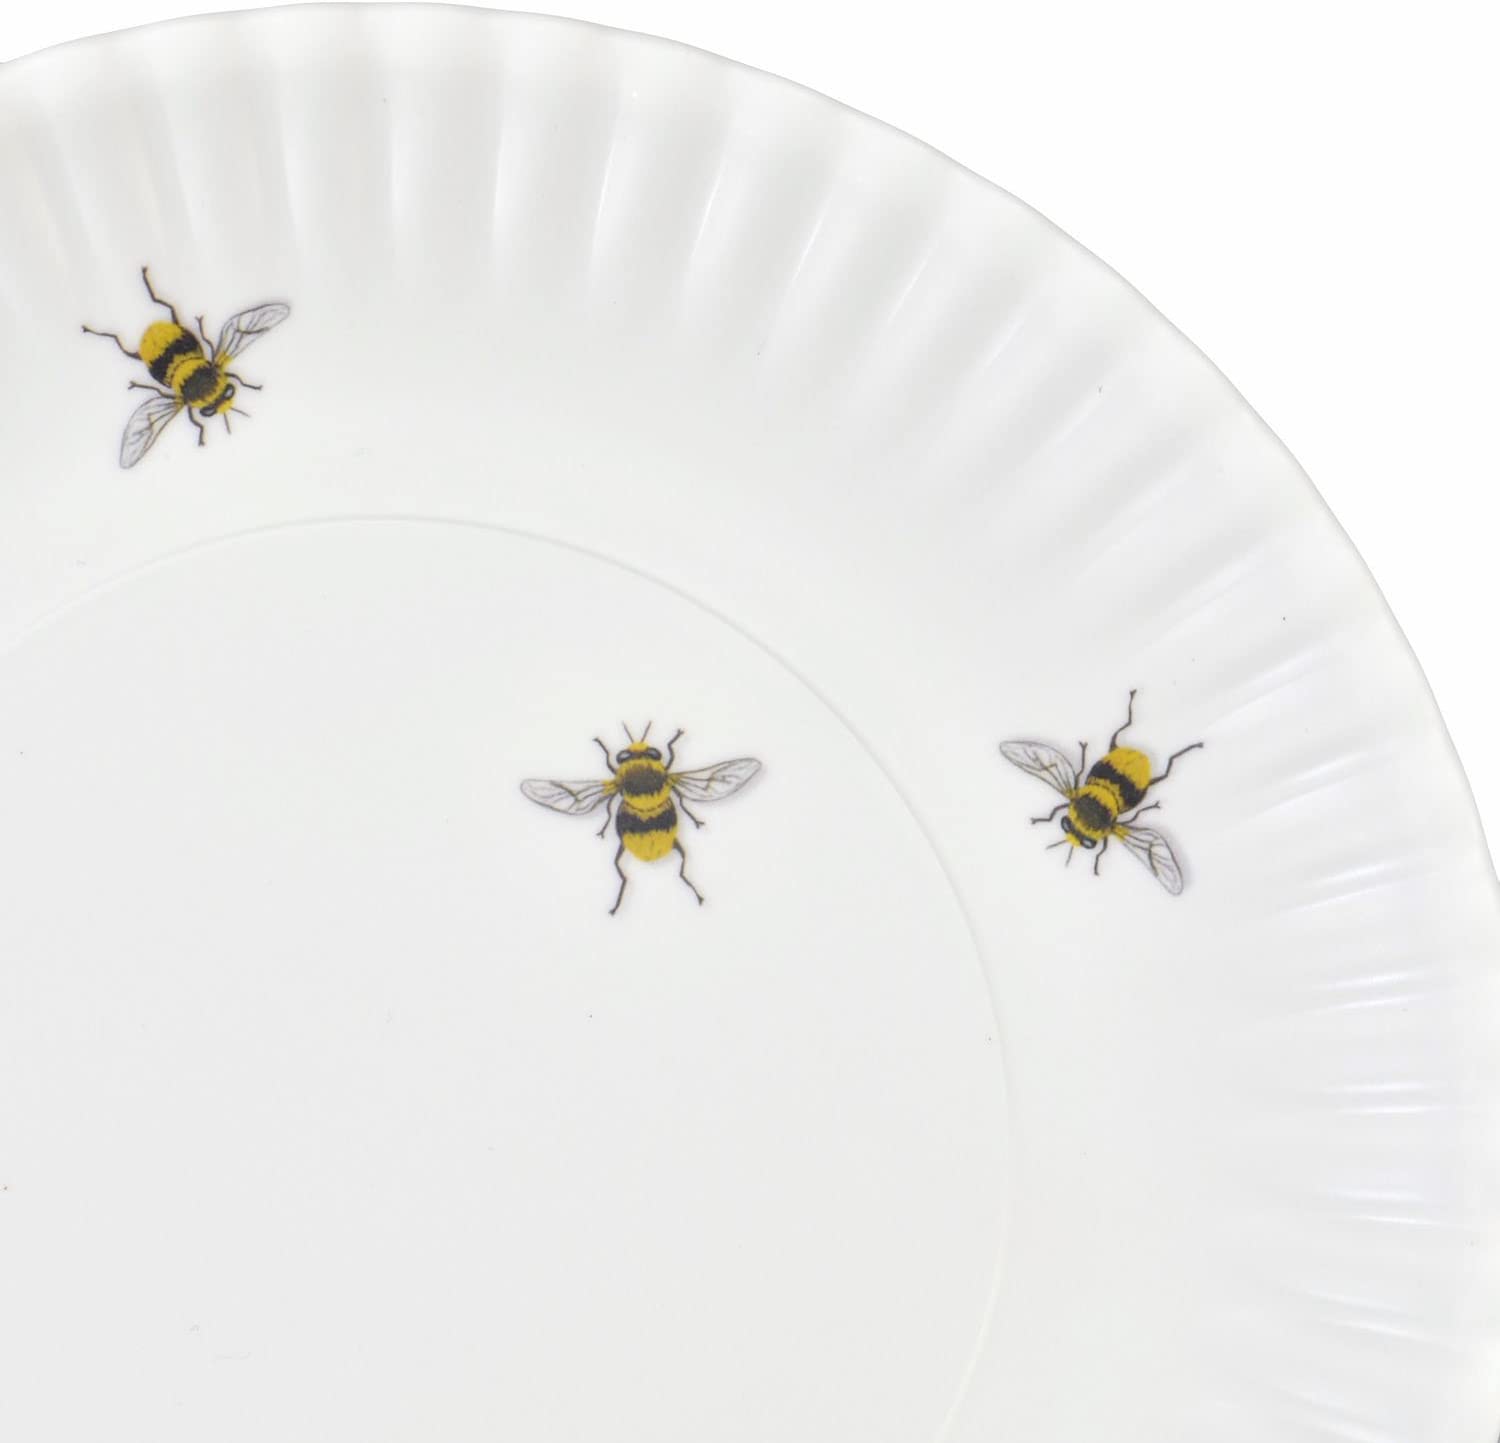 Bees Melamine Paper Plate - 9 Inch